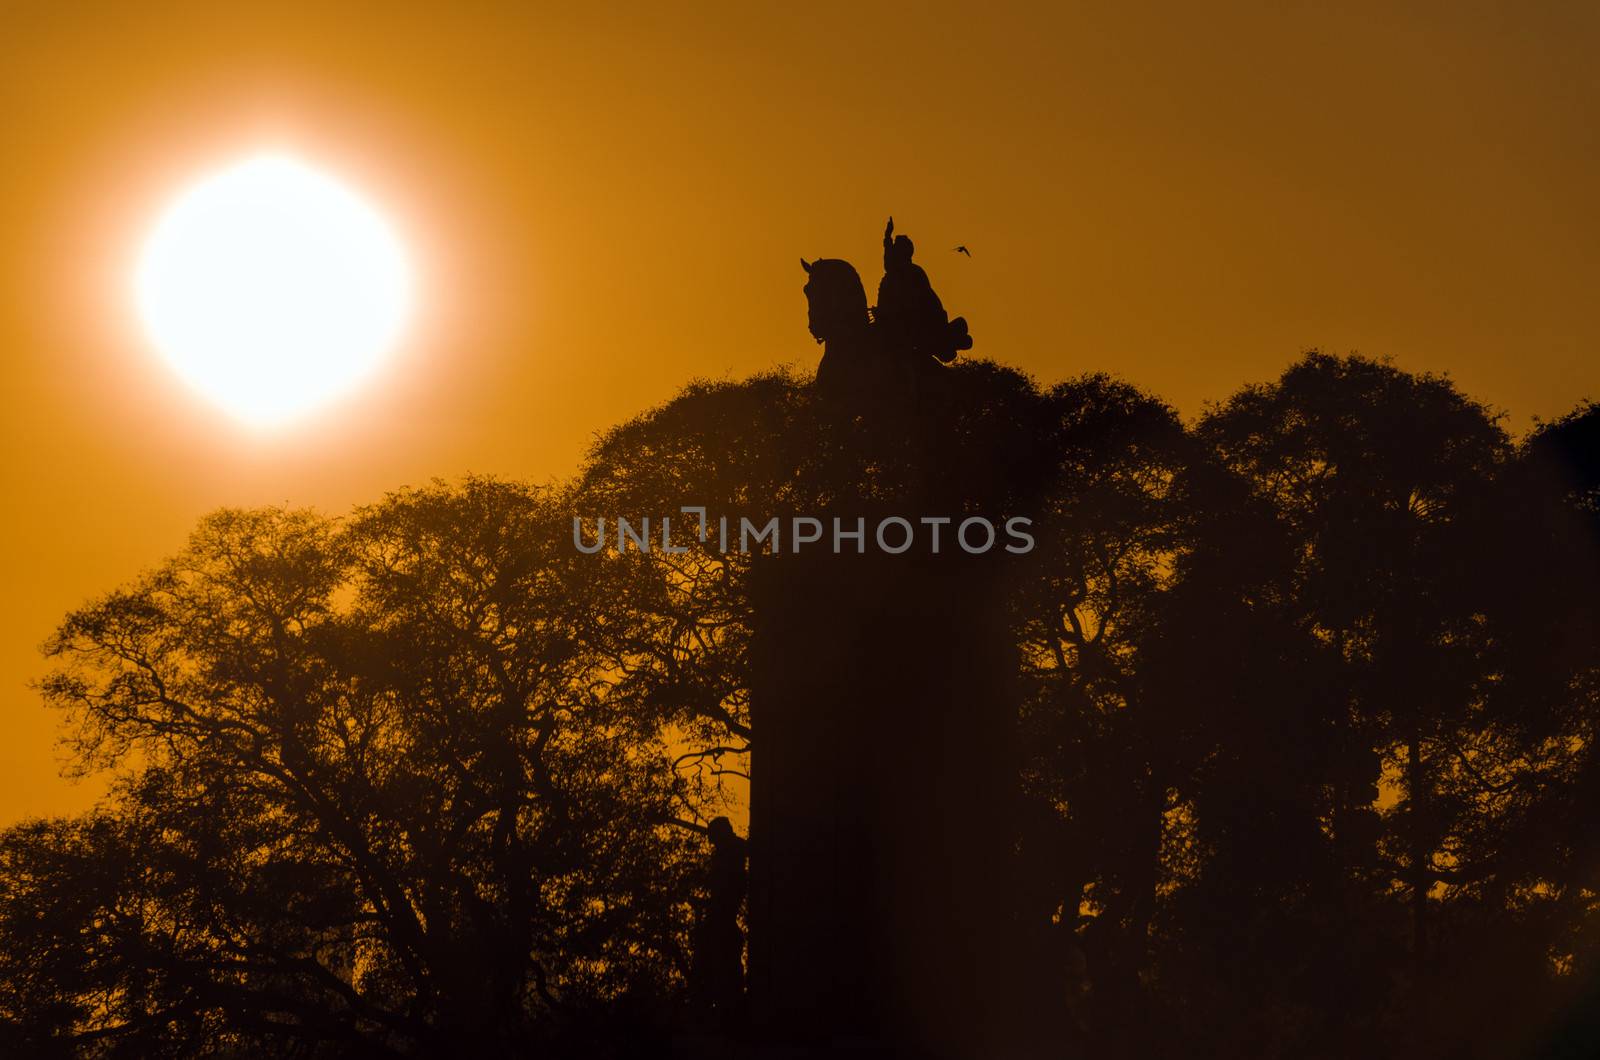 The sun rising of a statue in the Recoleta neighborhood of Buenos Aires, Argentina